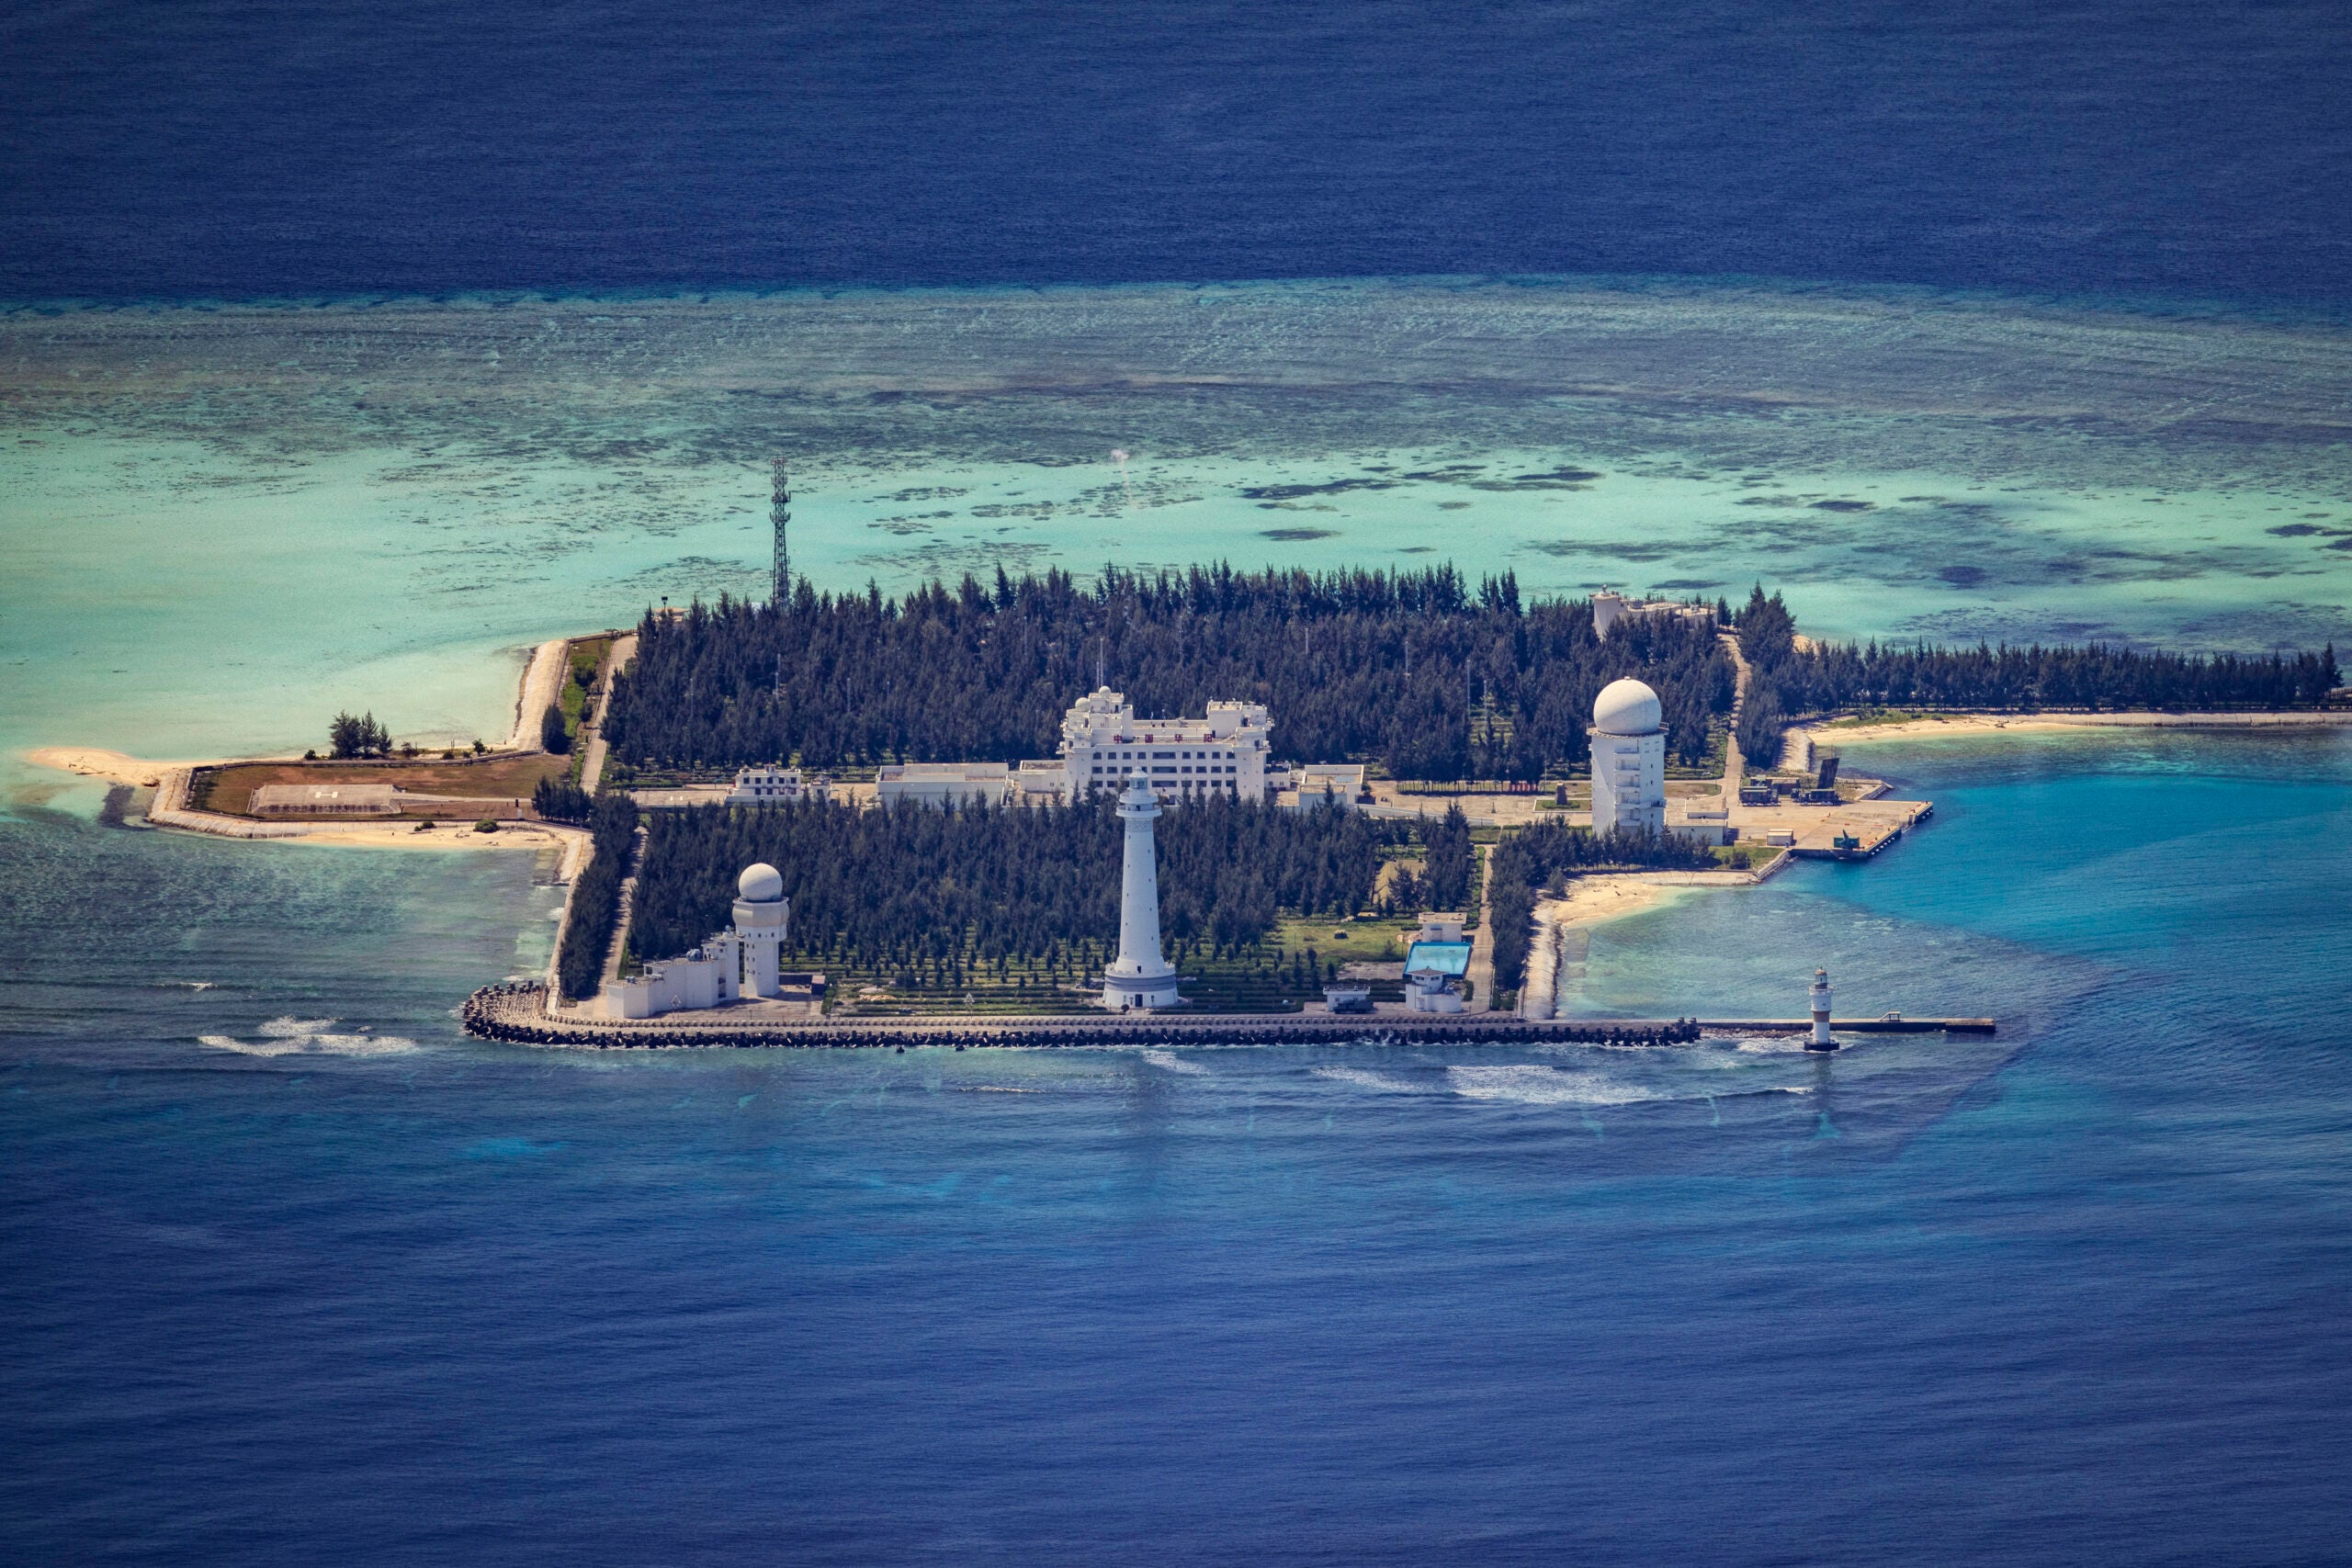 SPRATLY ISLANDS, AT SEA - OCTOBER 25: Buildings and structures are seen on the artificial island built by China in Cuarteron Reef on October 25, 2022 in Spratly Islands, South China Sea. China has progressively asserted its claim of ownership over disputed islands in the South China Sea by artificially increasing the size of islands, creating new islands and building ports, military outposts and airstrips. The South China sea is an important trade route and is of significant interest as geopolitical tensions remain high in the region. (Photo by Ezra Acayan/Getty Images)